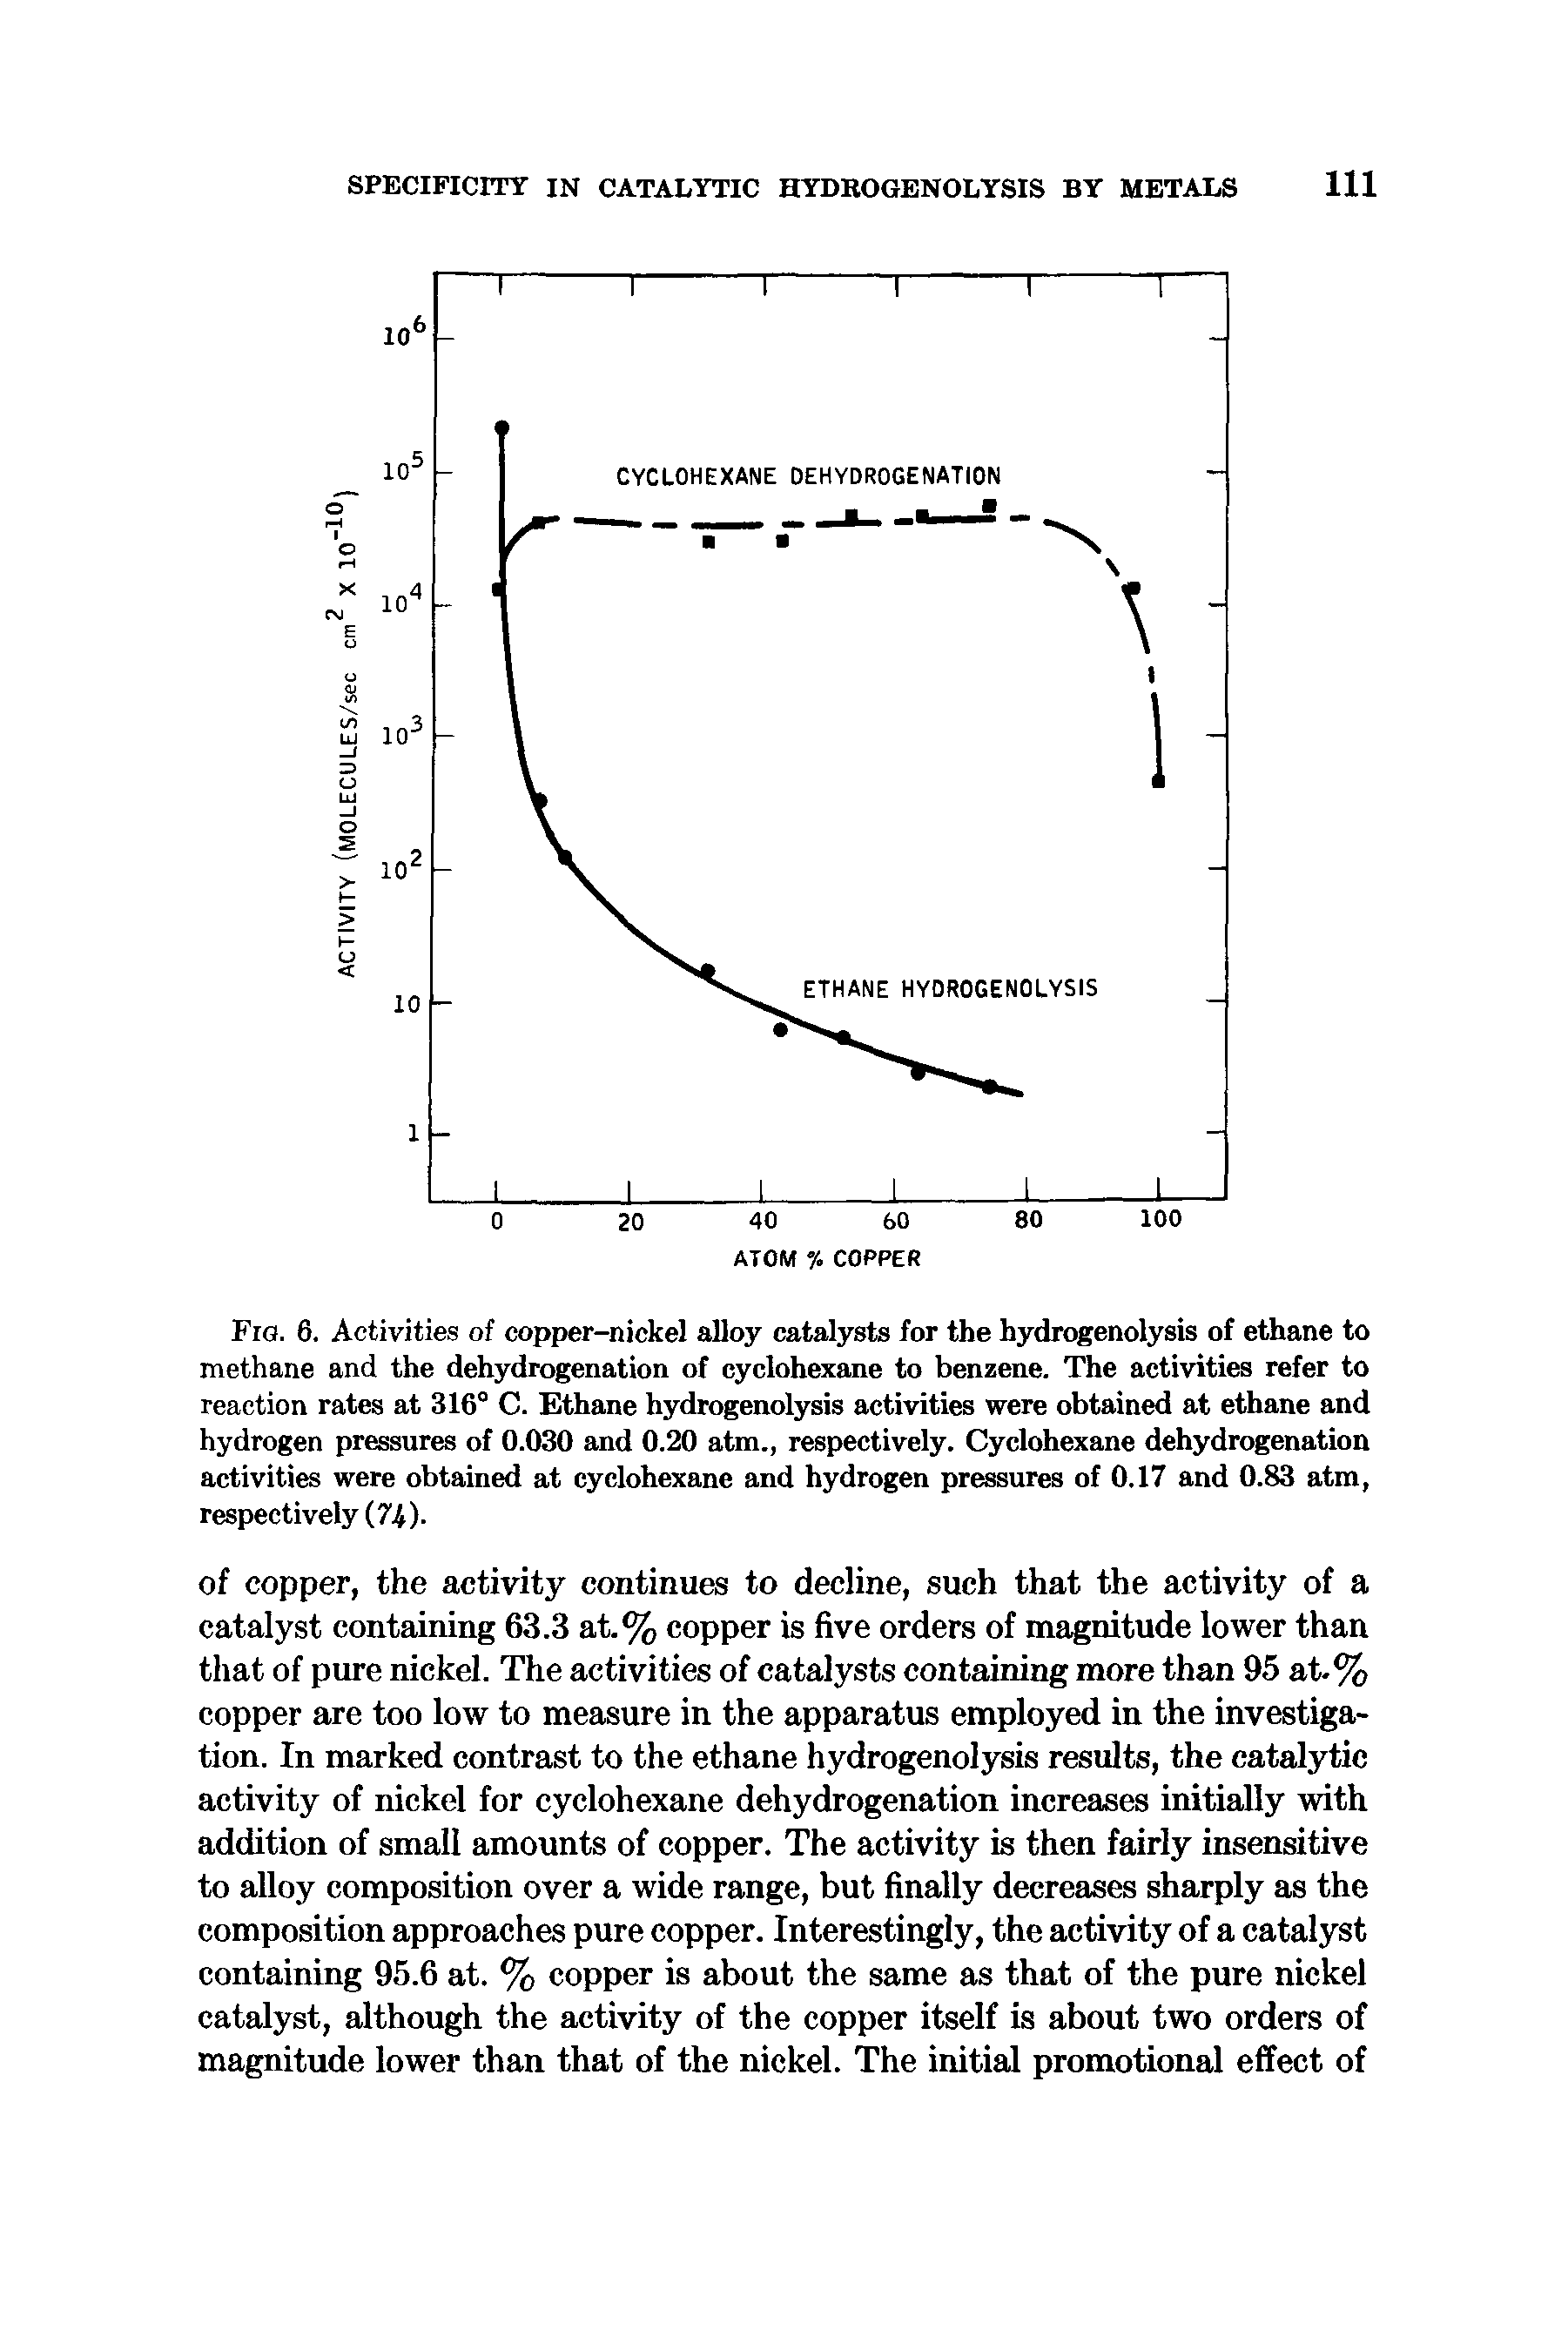 Fig. 6. Activities of copper-nickel alloy catalysts for the hydrogenolysis of ethane to methane and the dehydrogenation of cyclohexane to benzene. The activities refer to reaction rates at 316° C. Ethane hydrogenolysis activities were obtained at ethane and hydrogen pressures of 0.030 and 0.20 atm., respectively. Cyclohexane dehydrogenation activities were obtained at cyclohexane and hydrogen pressures of 0.17 and 0.83 atm, respectively (74).